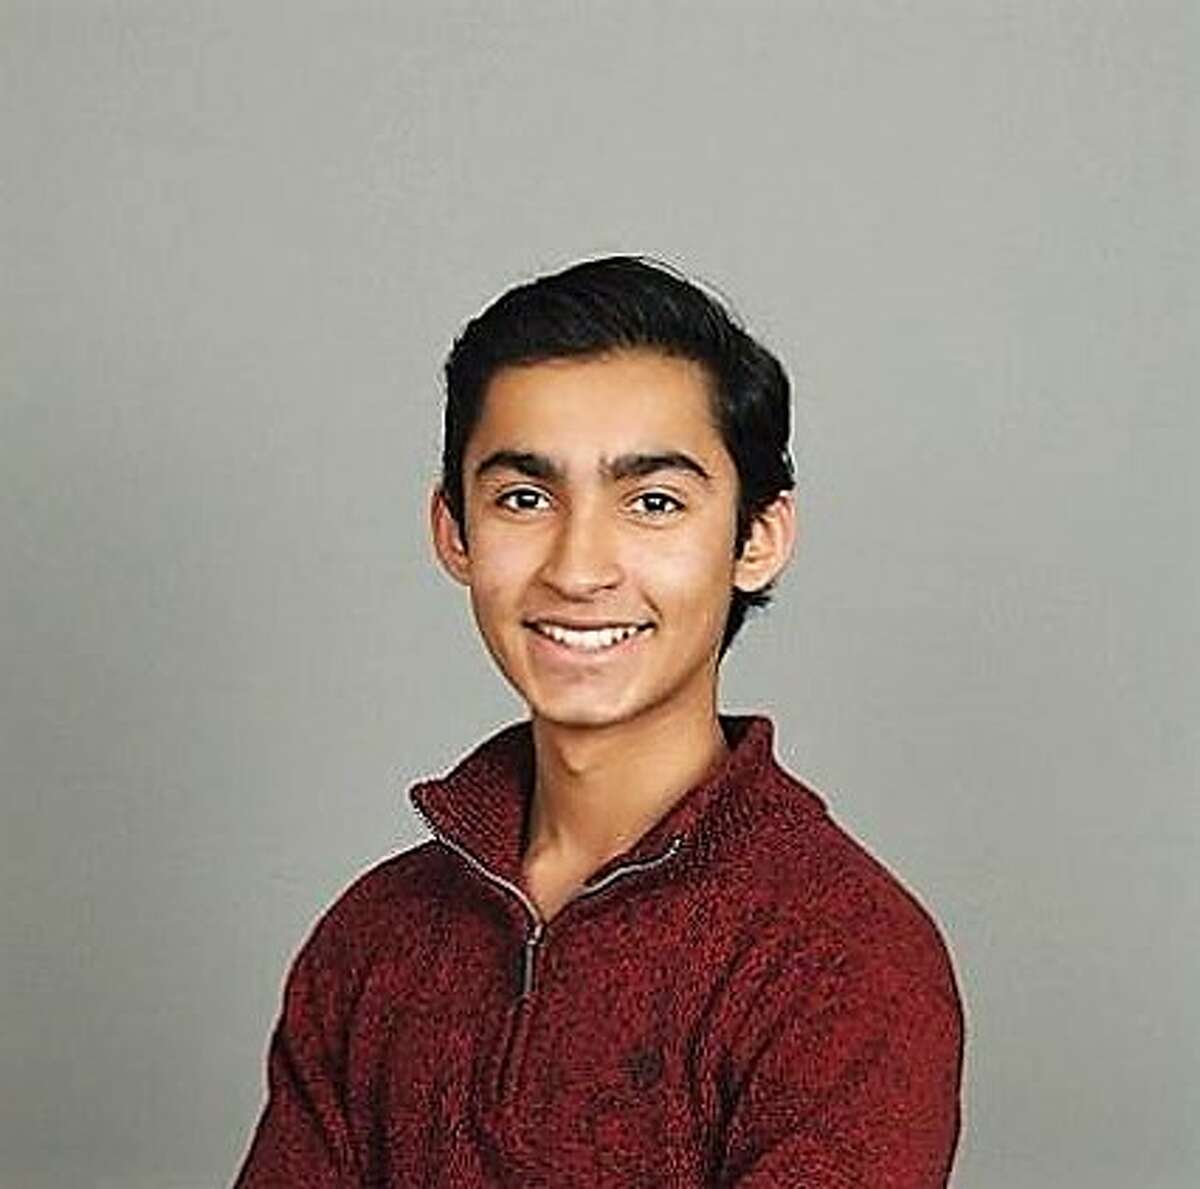 Anshuman Suryawanshi, the RHS freshman class president, has protested the removal of Global 1 — a world history class — as a graduation requirement for Ridgefield students.